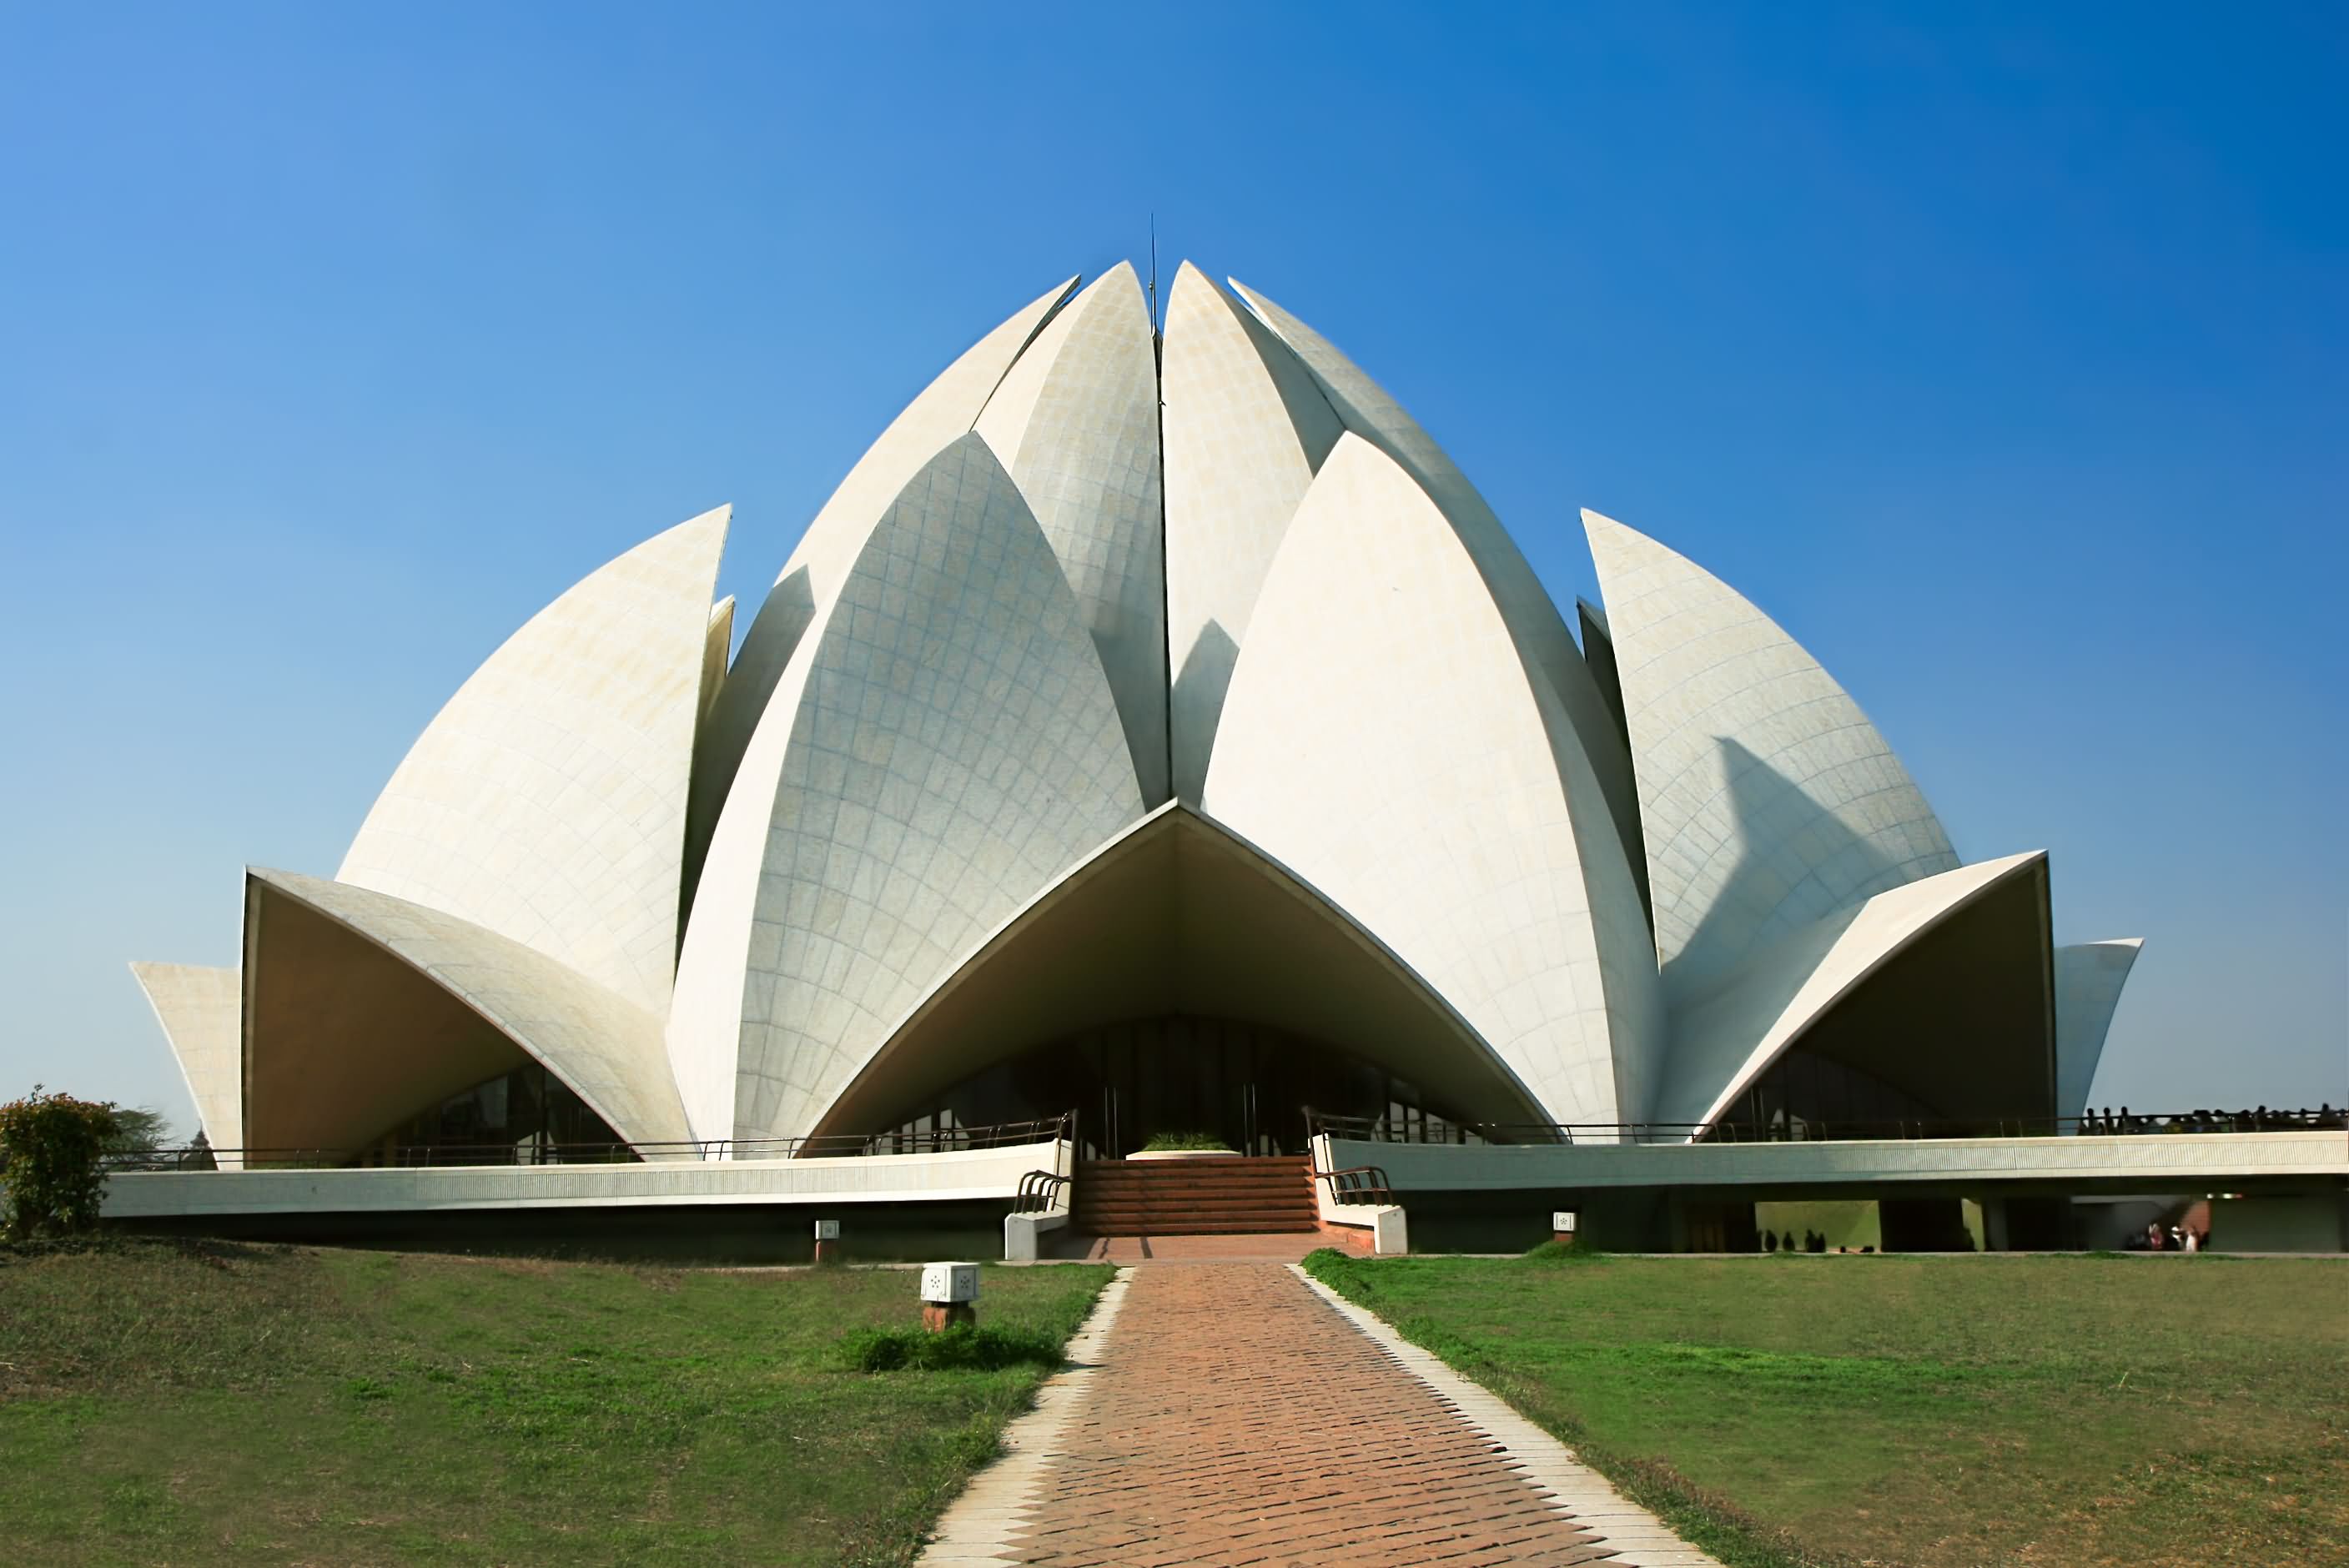 Entrance Way To The Lotus Temple